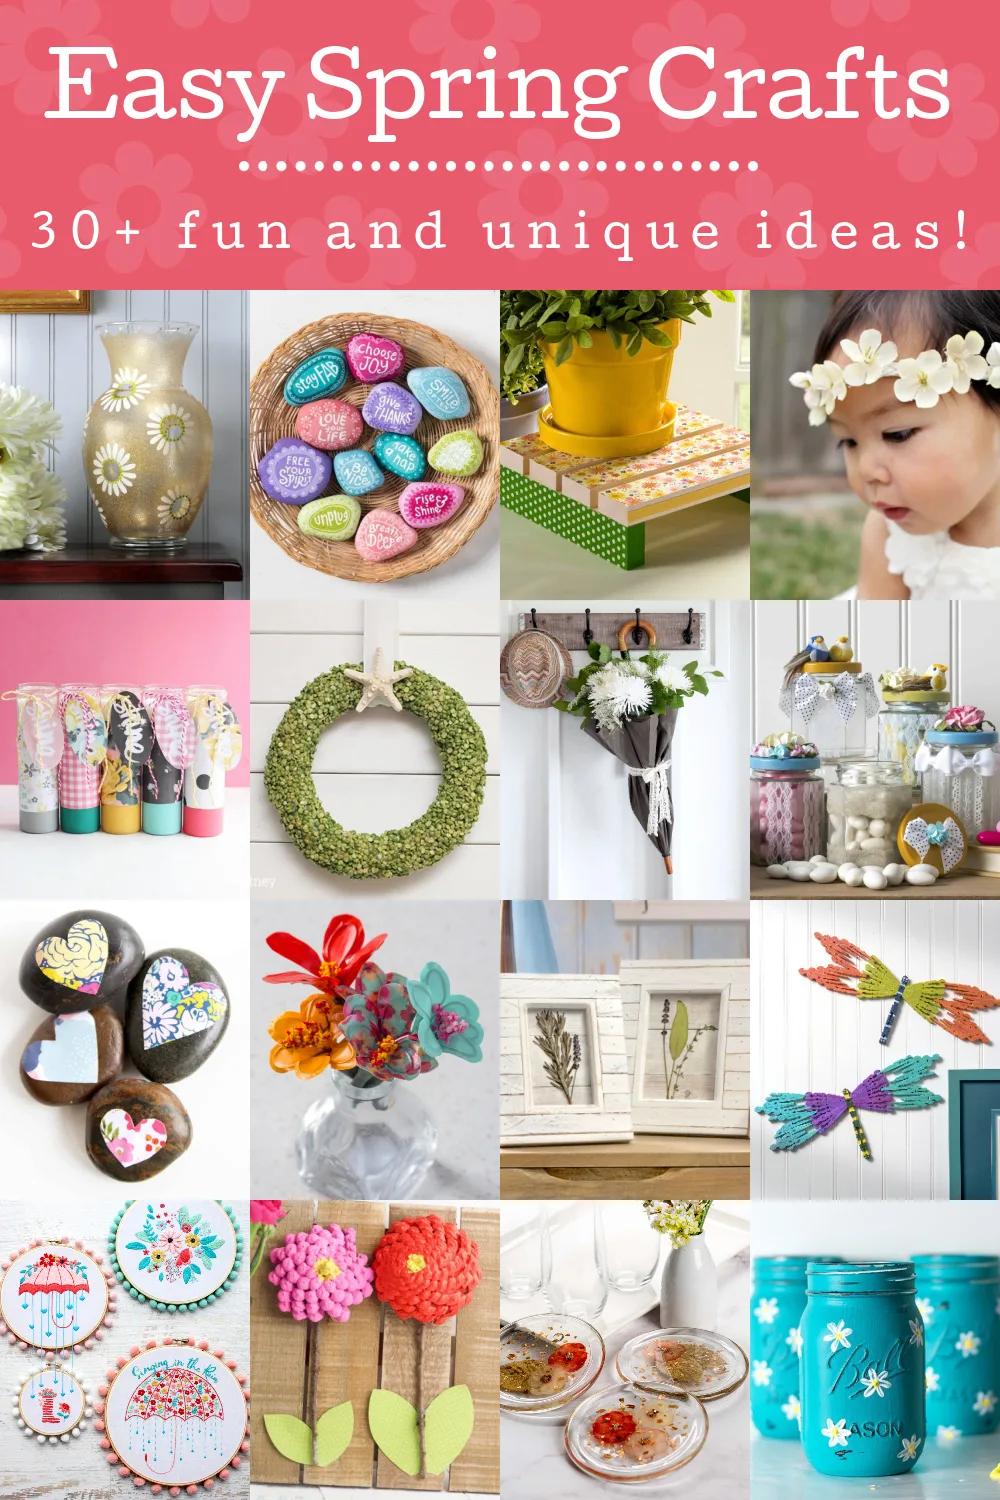 10 Of The Best Creative Spring DIY Crafts - Midwest Life and Style Blog